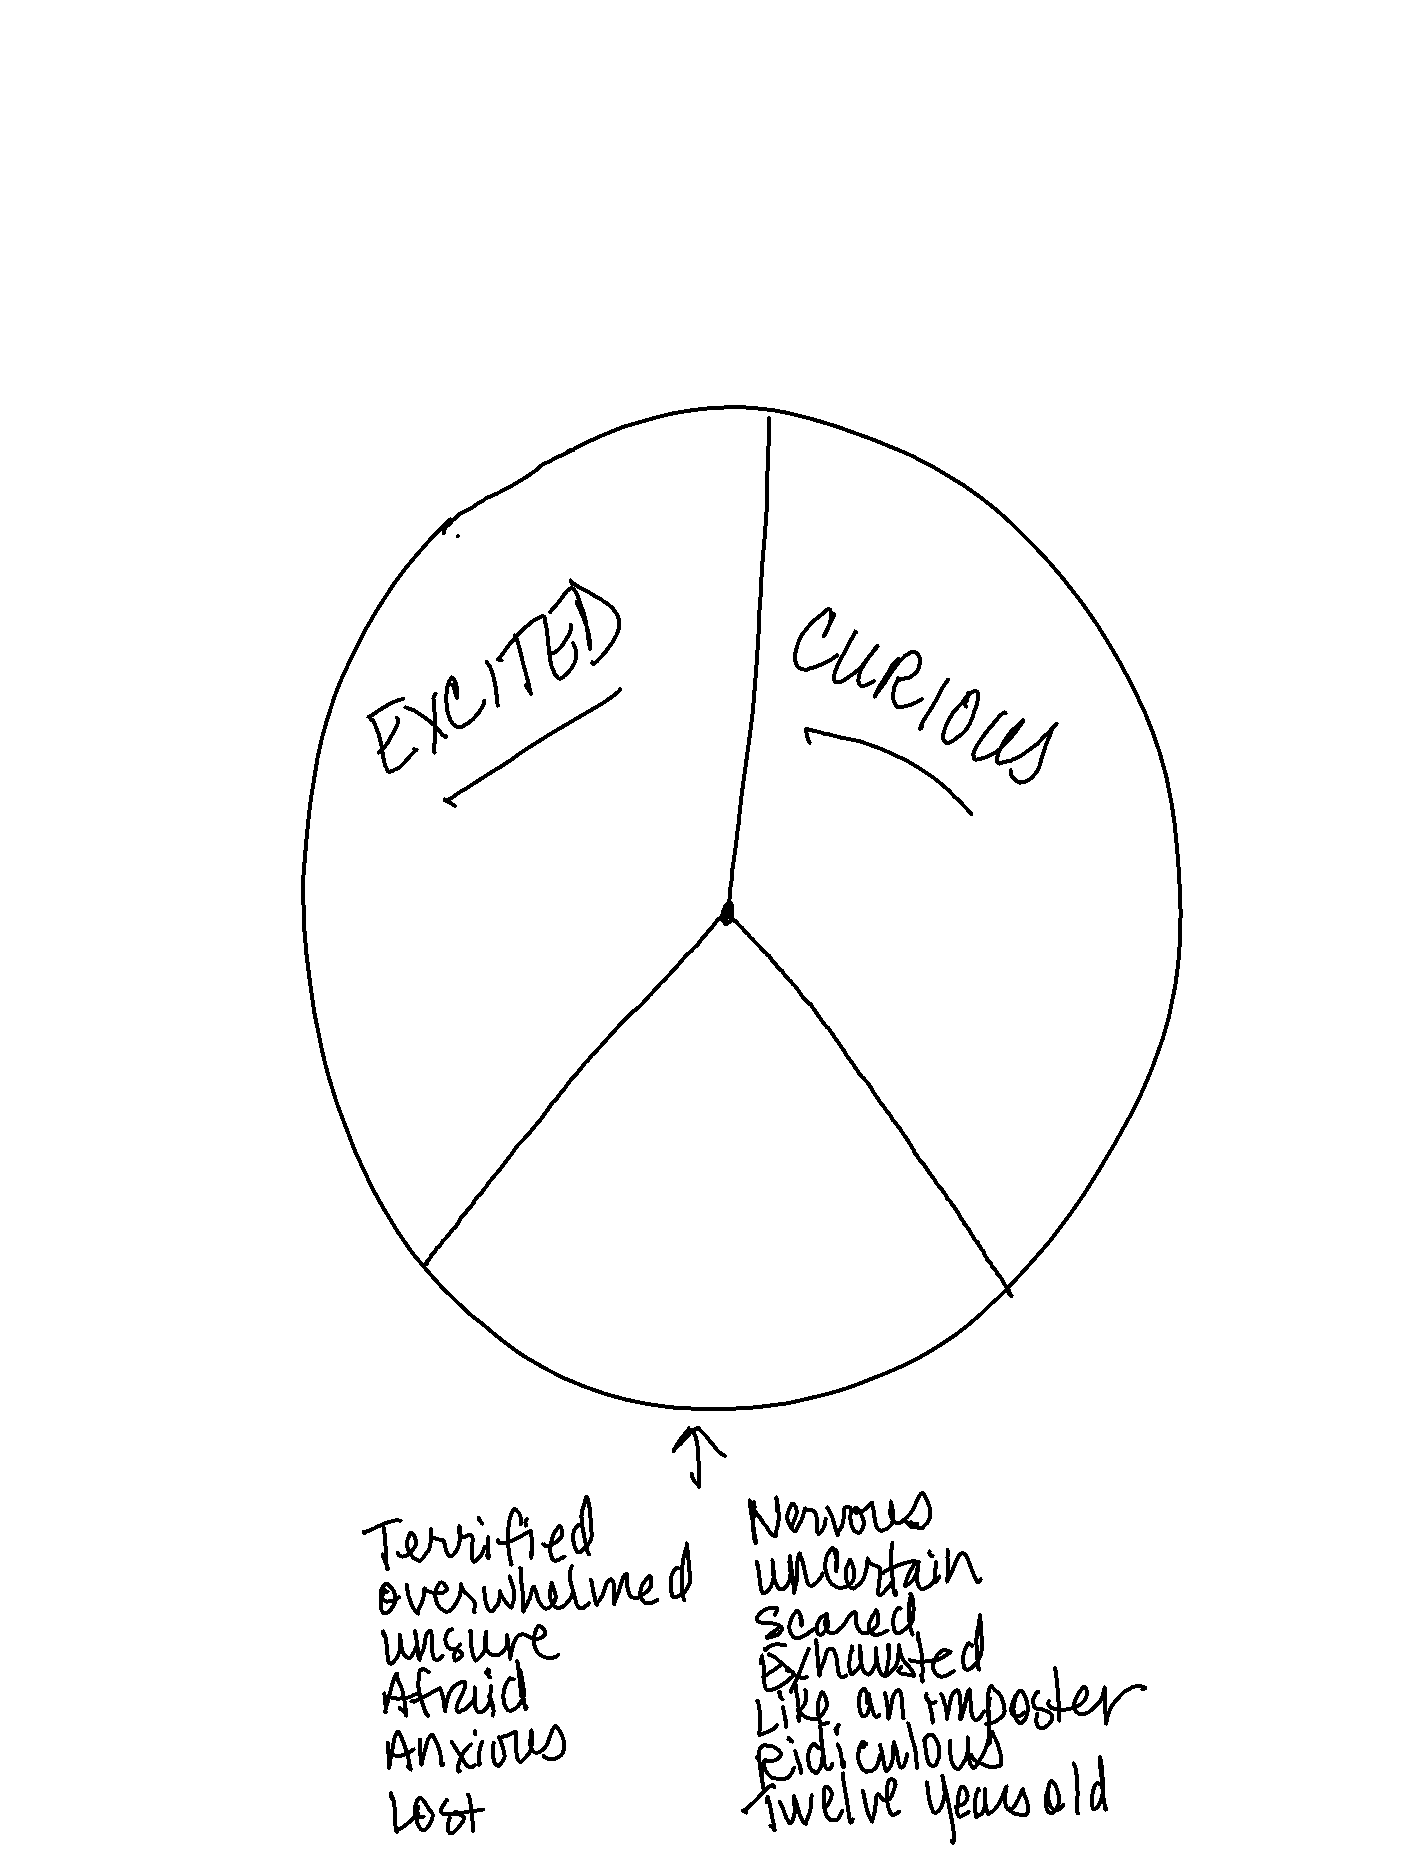 Hand drawing of a circle divided into 3 parts: 1) Excited 2) Curious, and 3) Overwhelmed/anxious/exhausted